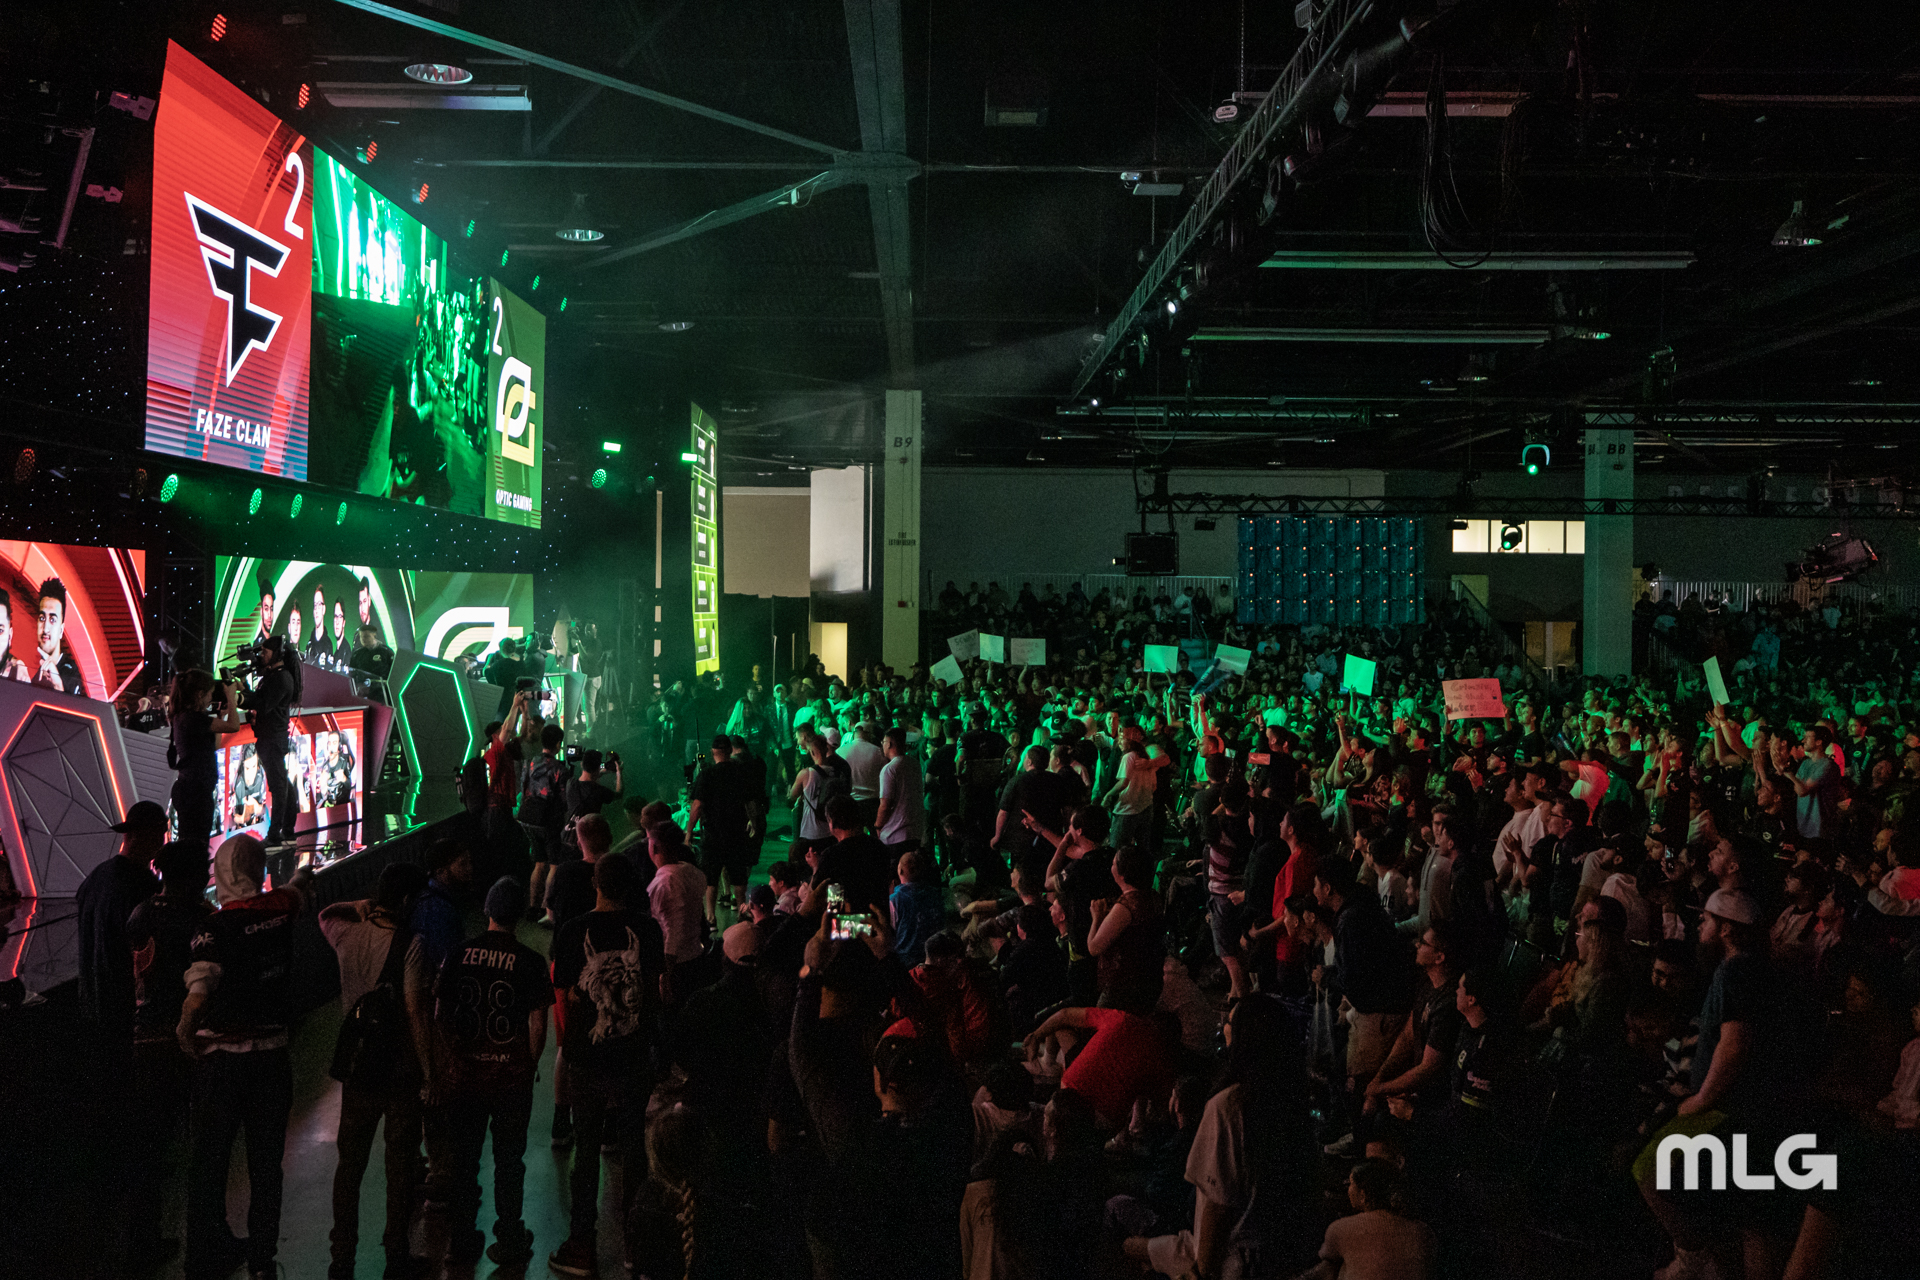 The crowd at a CWL event cheering on FaZe vs. OpTic.